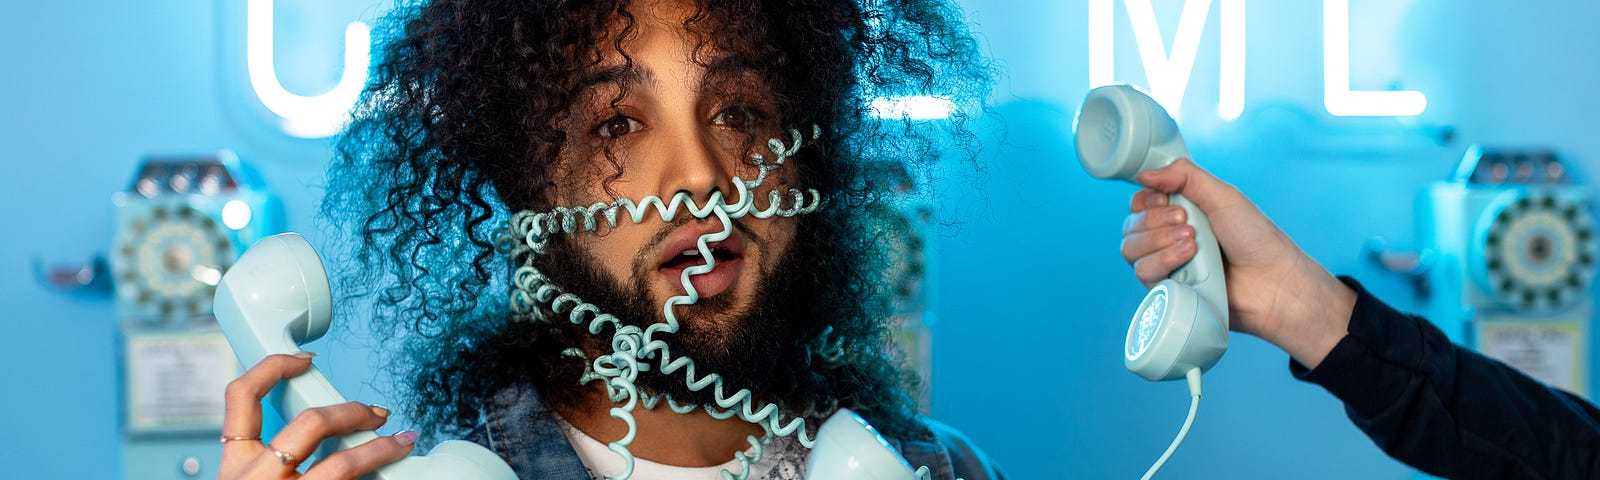 A man looking disheveled, wrapped with multiple coiling phone cords over his body and face, with multiple hands holding the phone receivers, reaching toward his face. The background is a blue neon lit sign that says “CALL ME”